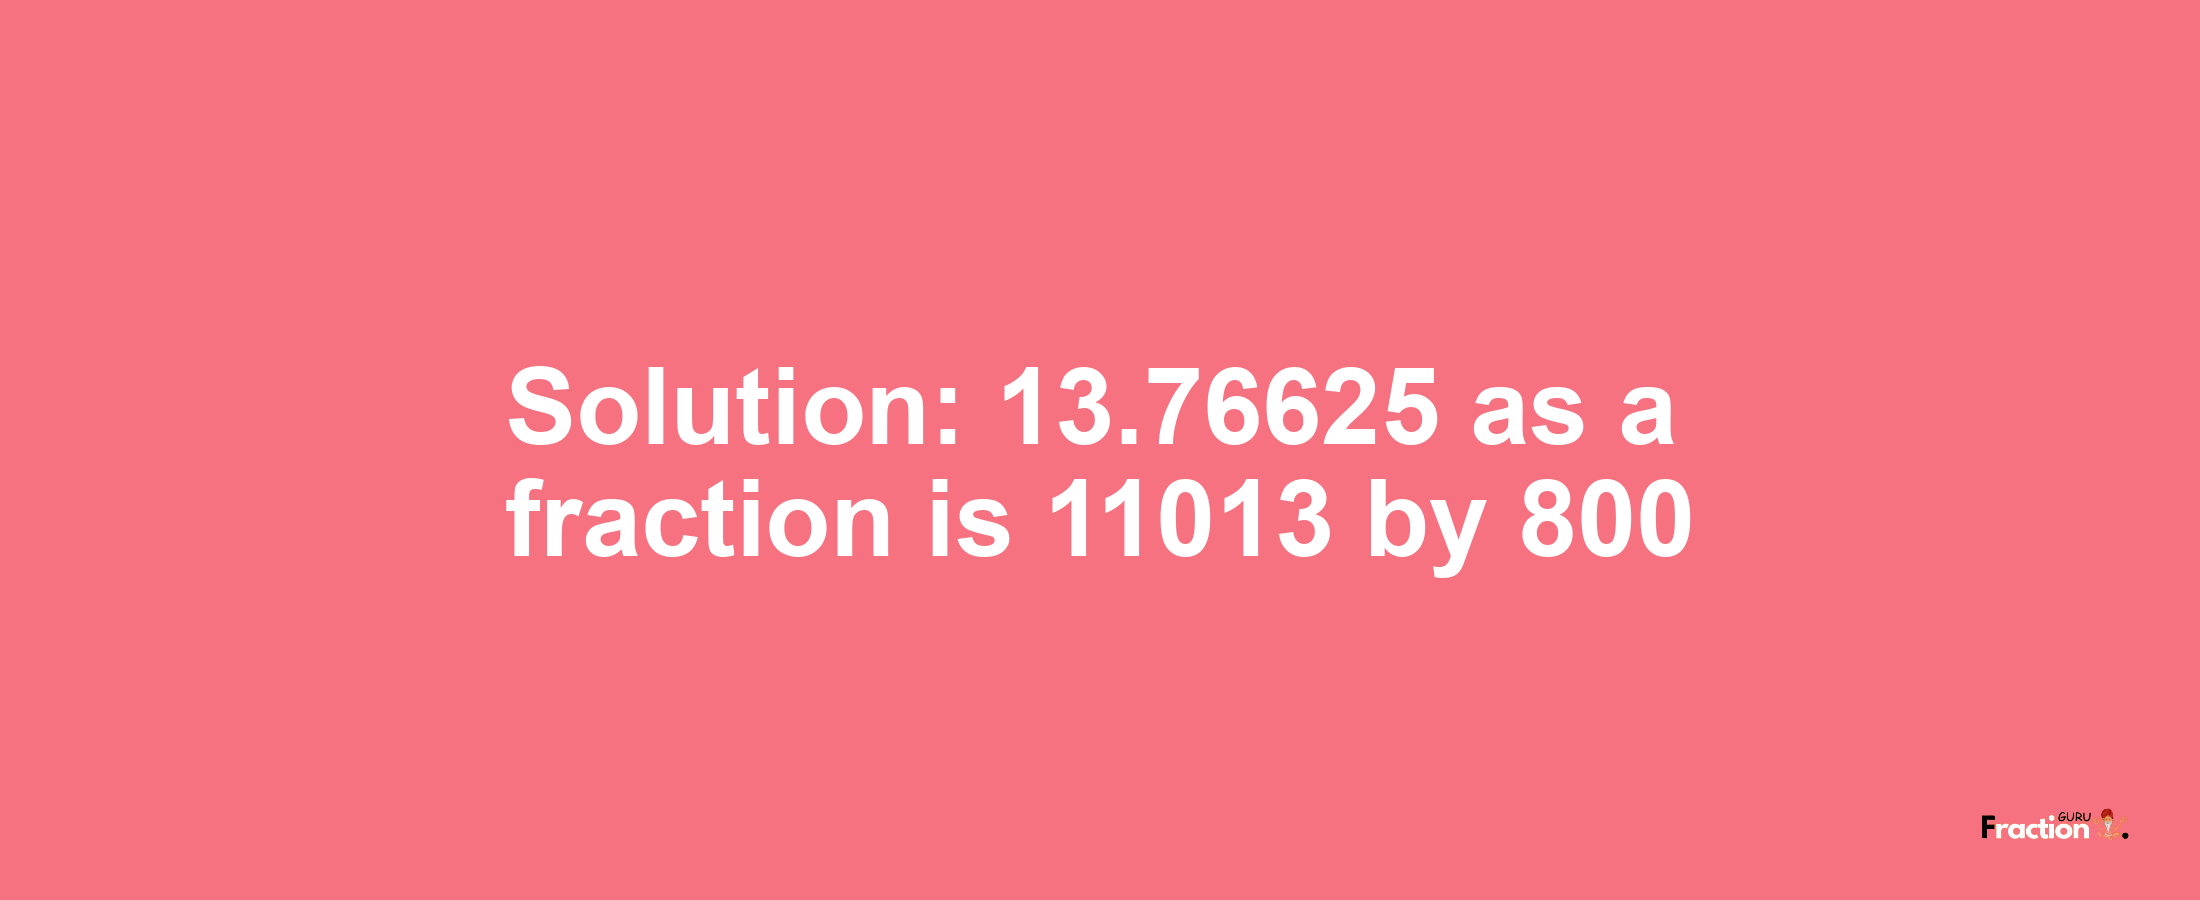 Solution:13.76625 as a fraction is 11013/800